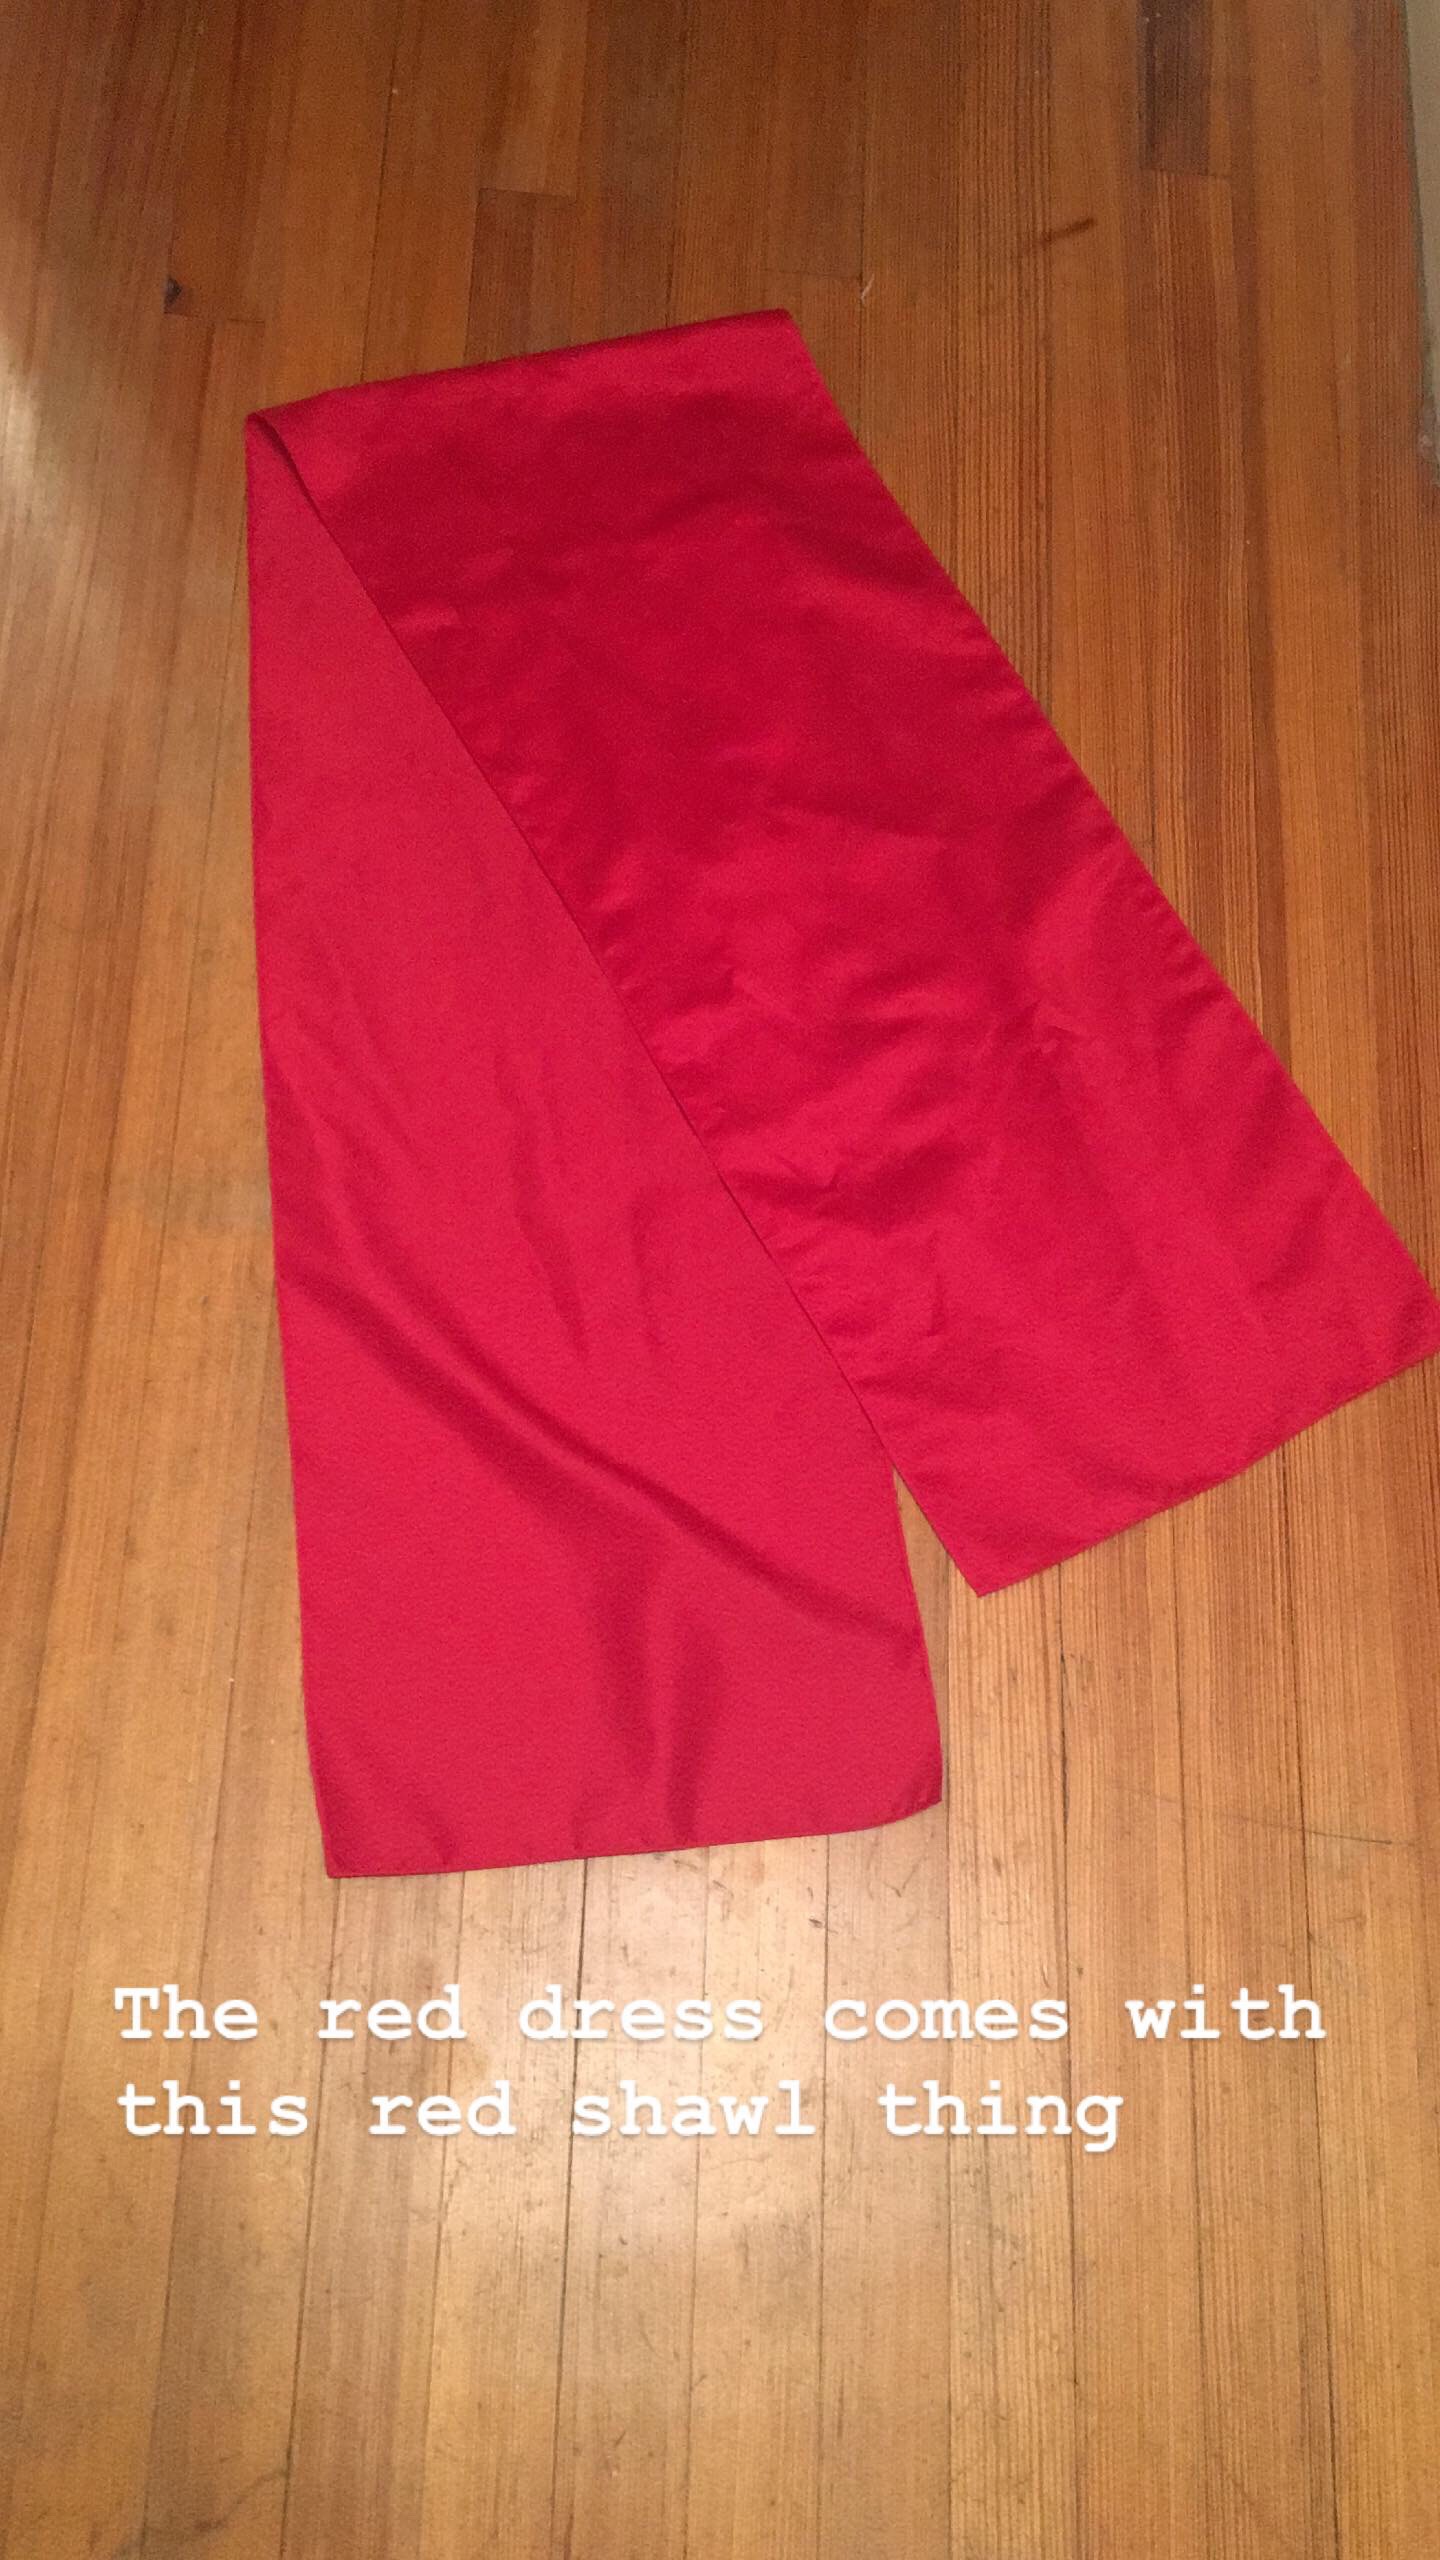 Size 6 Red Ball Gown on Queenly